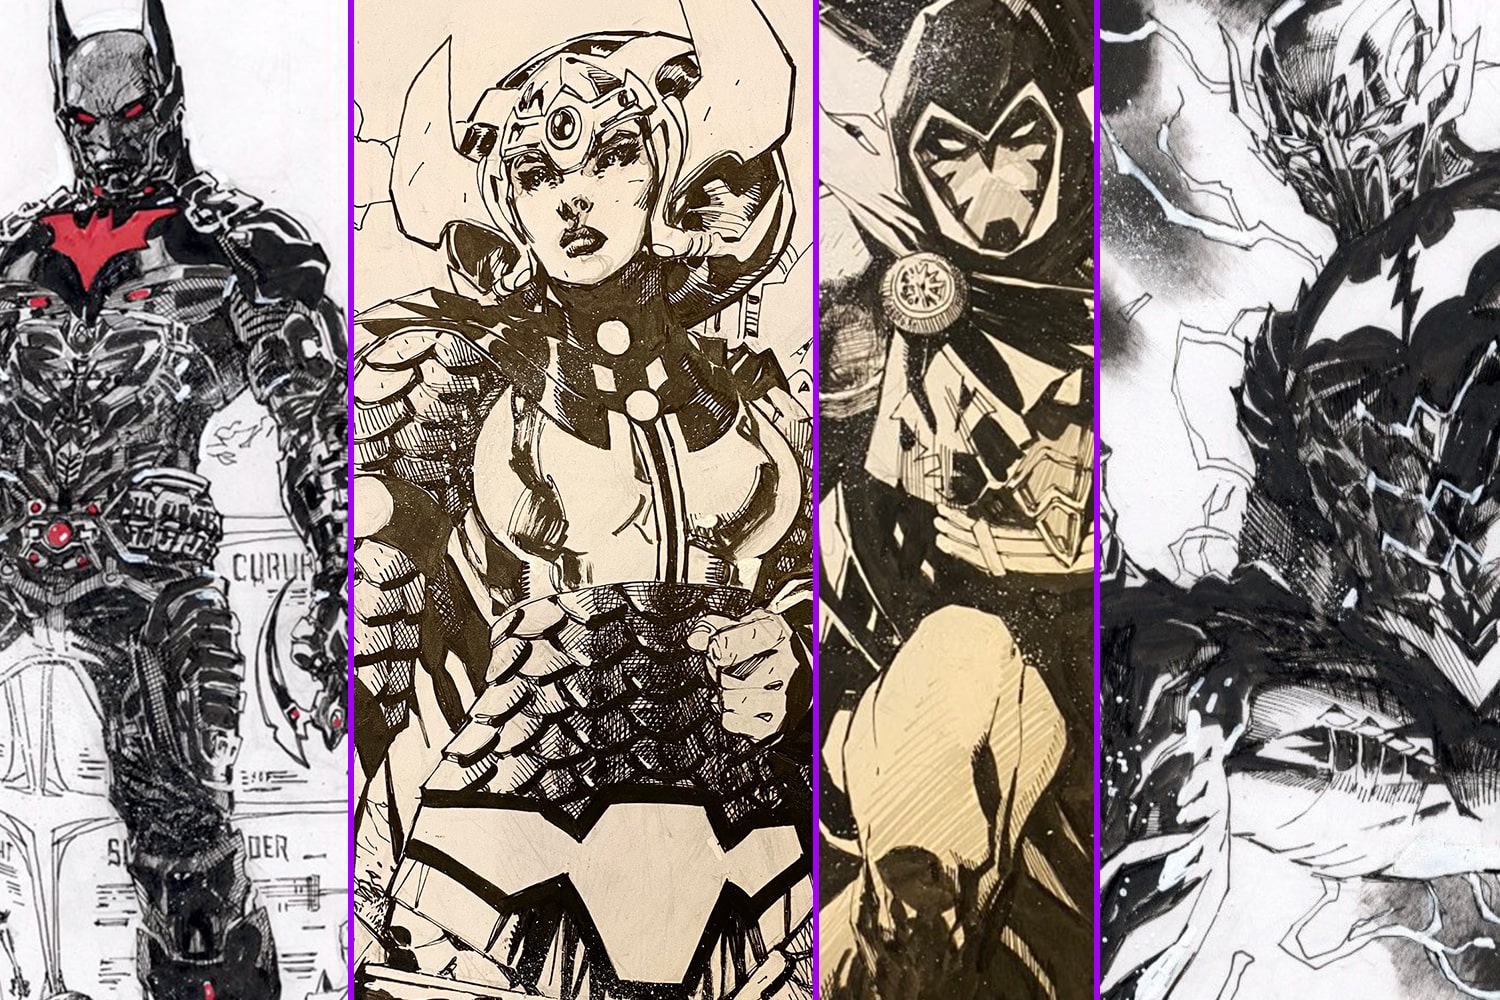 Support comic shops: View every Jim Lee sketch so far in his 60 sketches in 60 days auction